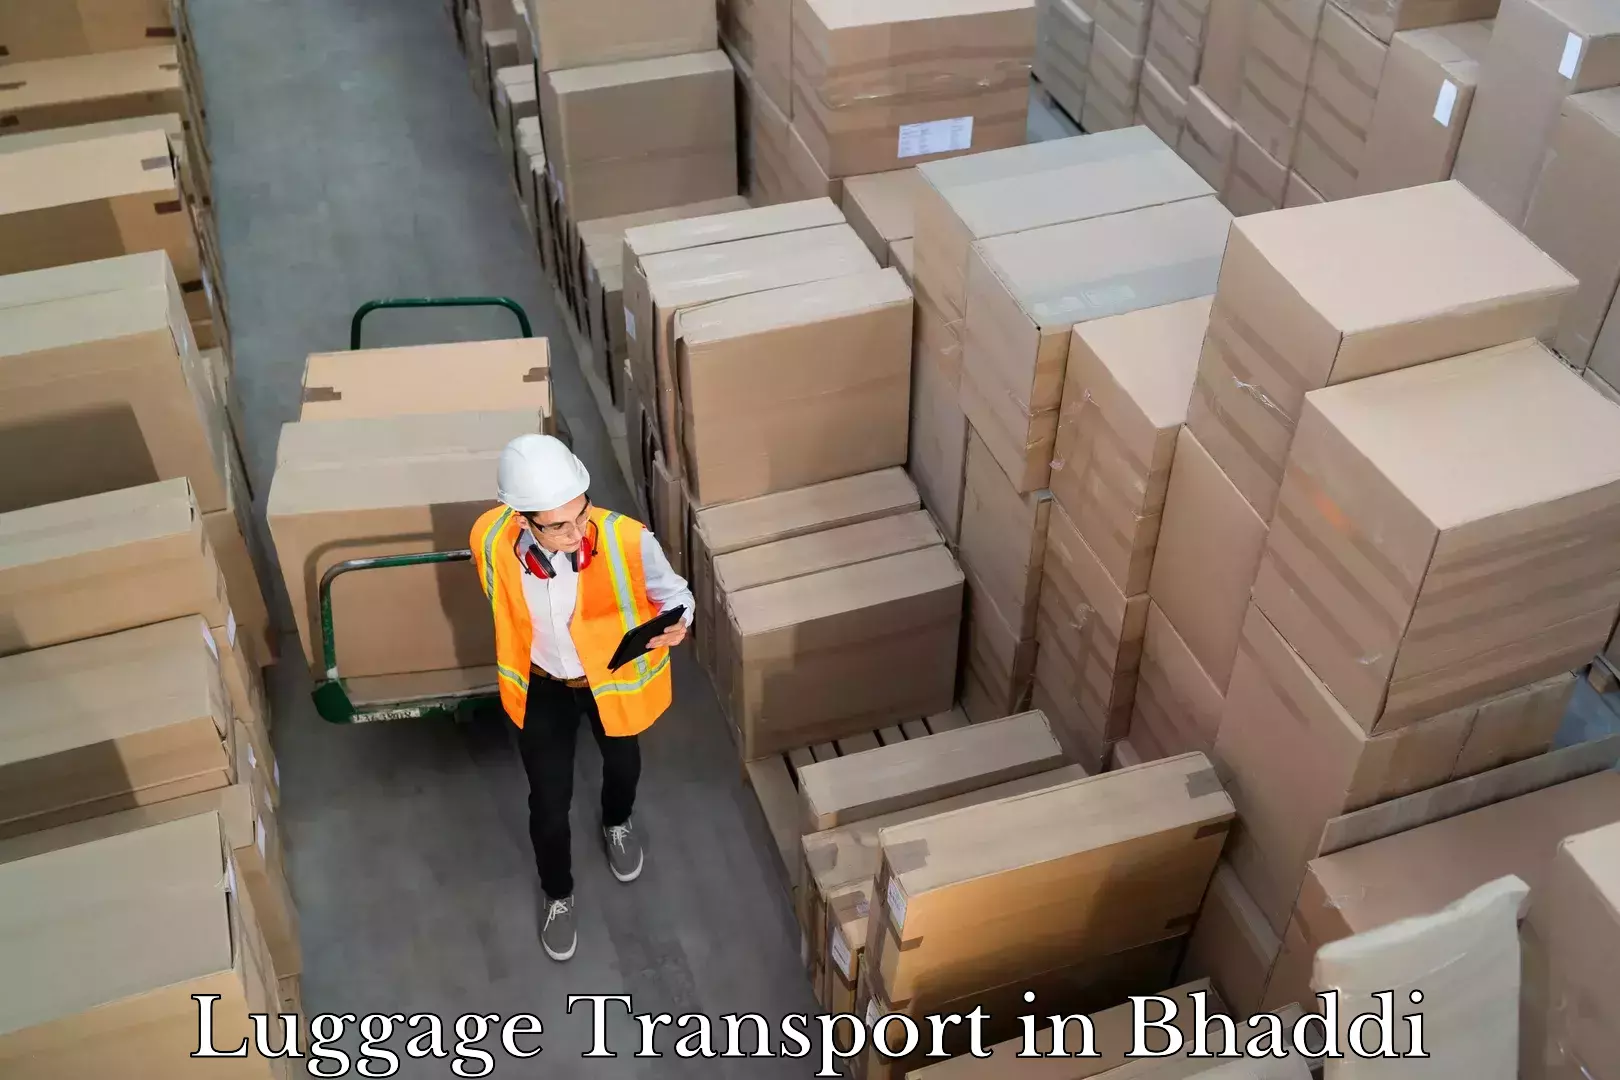 Baggage delivery optimization in Bhaddi